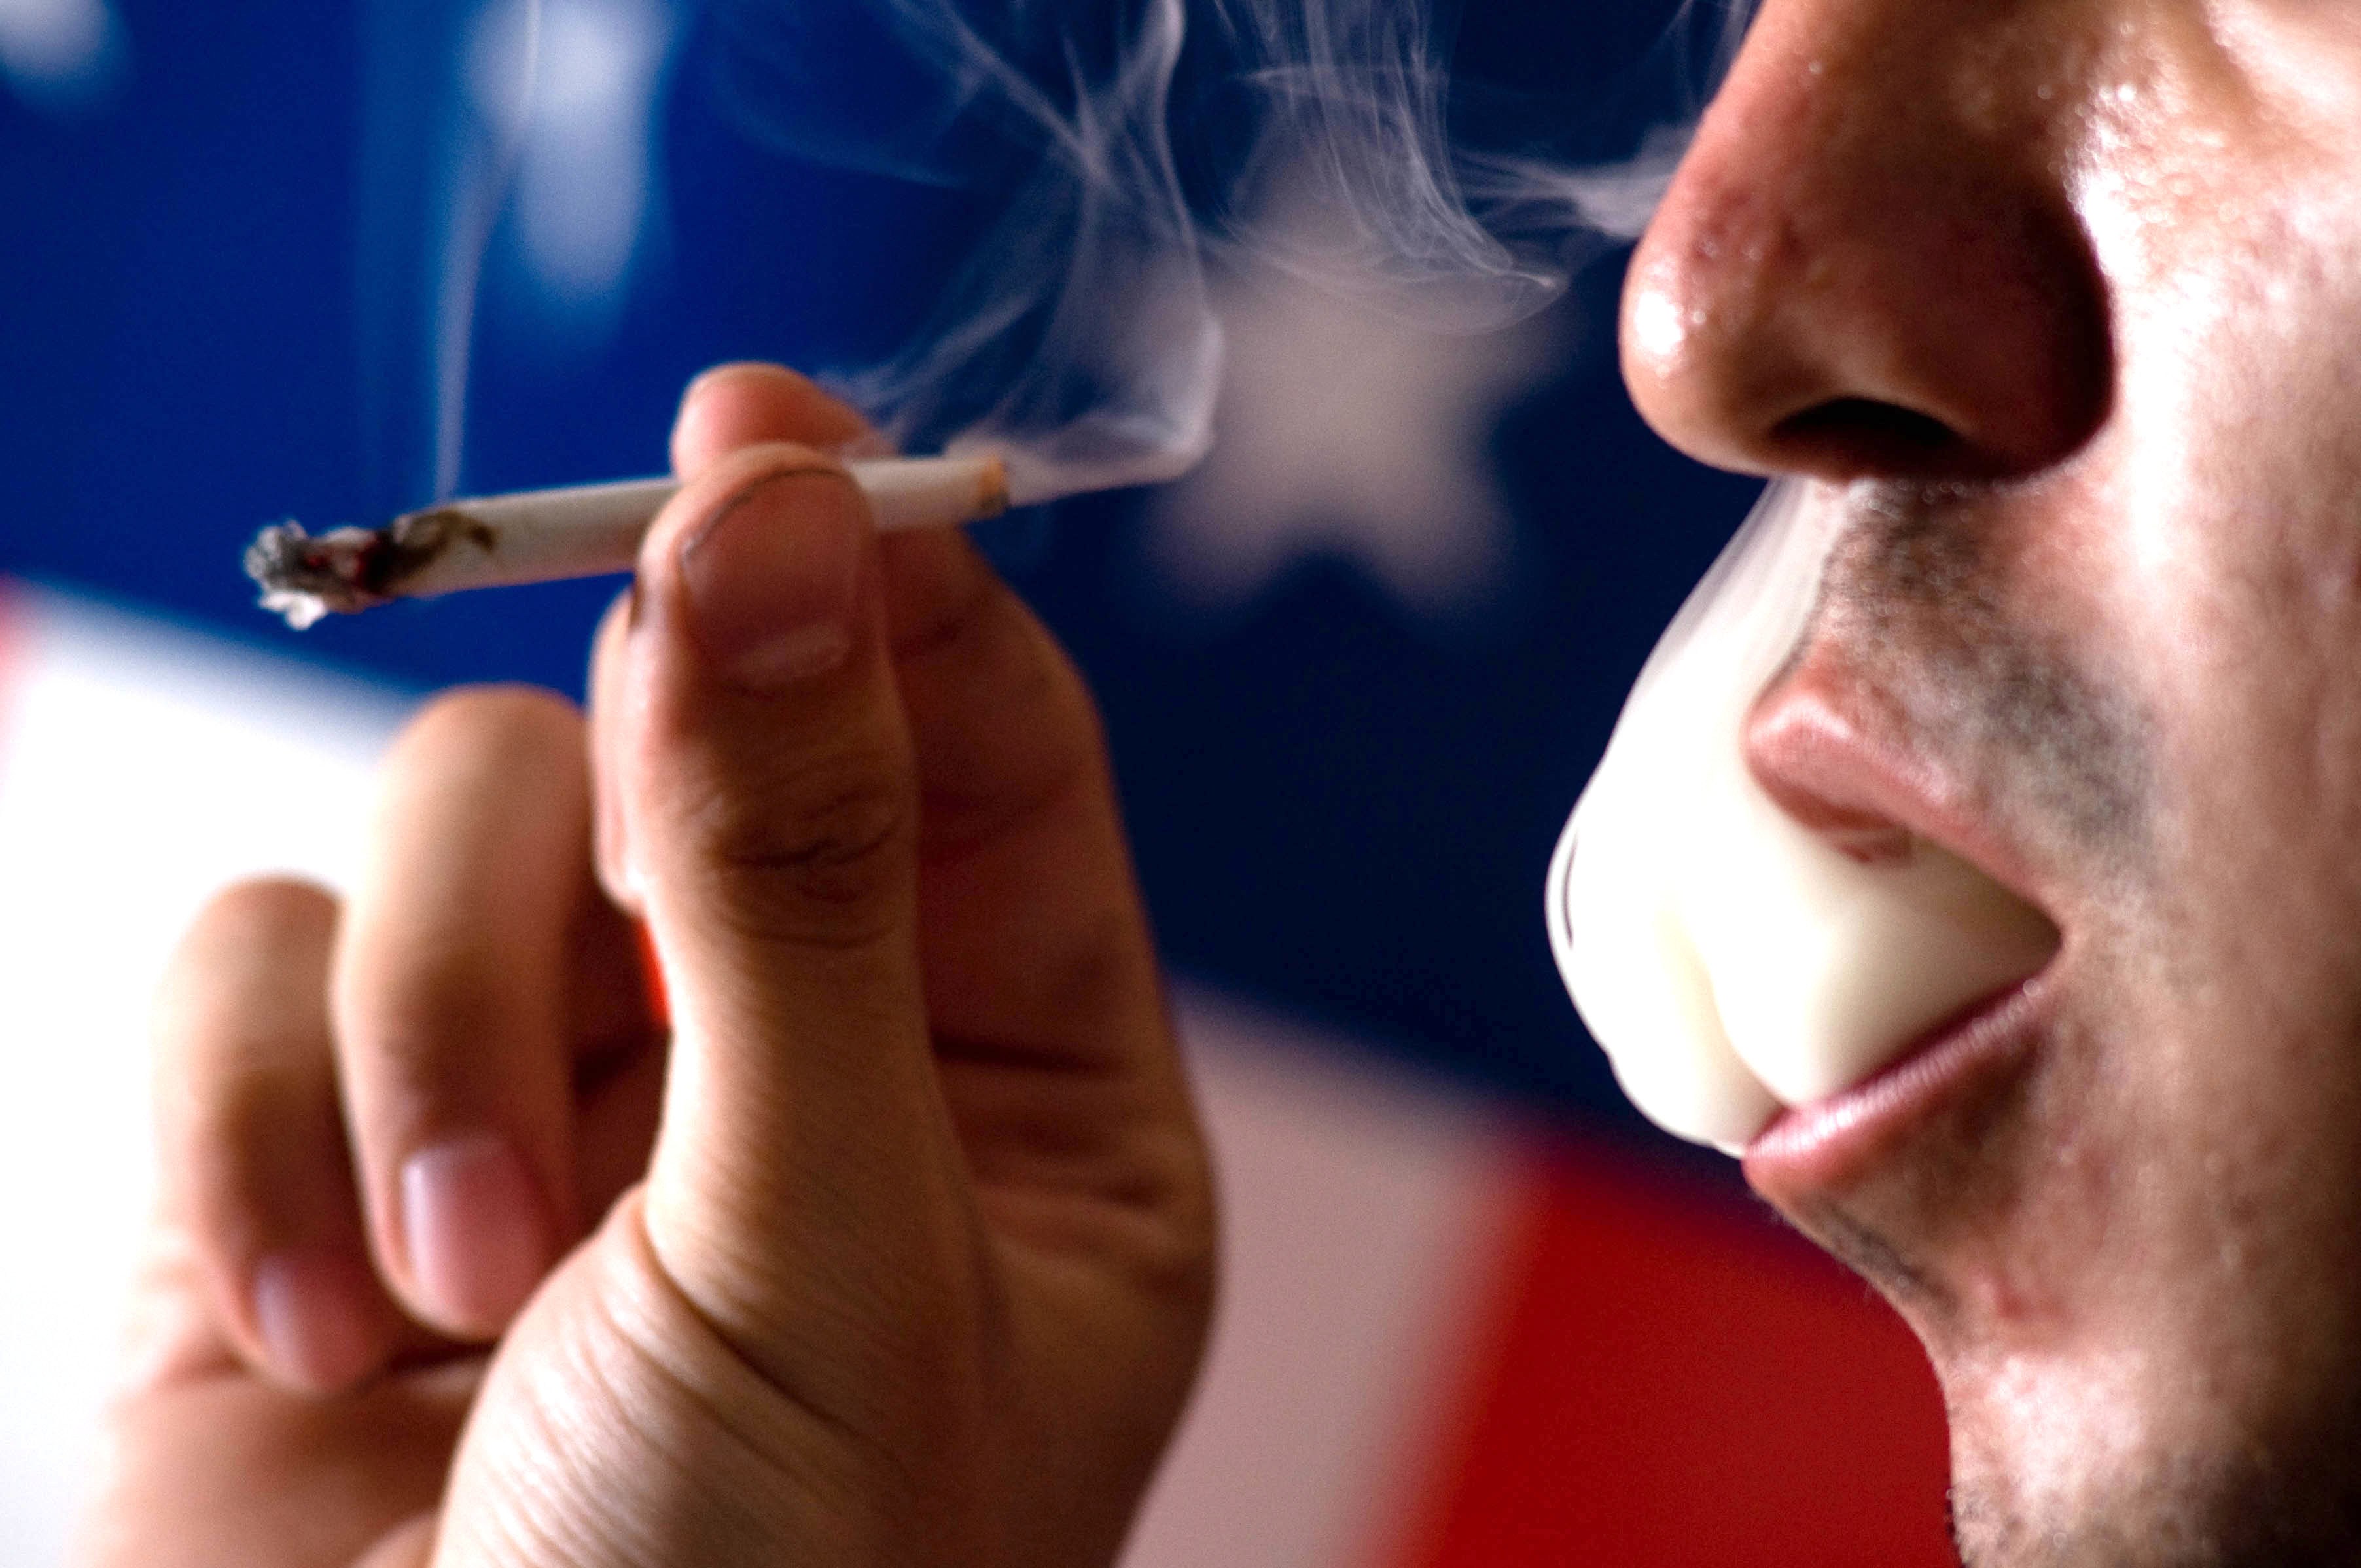 Medible review new gallup poll finds record 64 support for legalizing marijuana in us